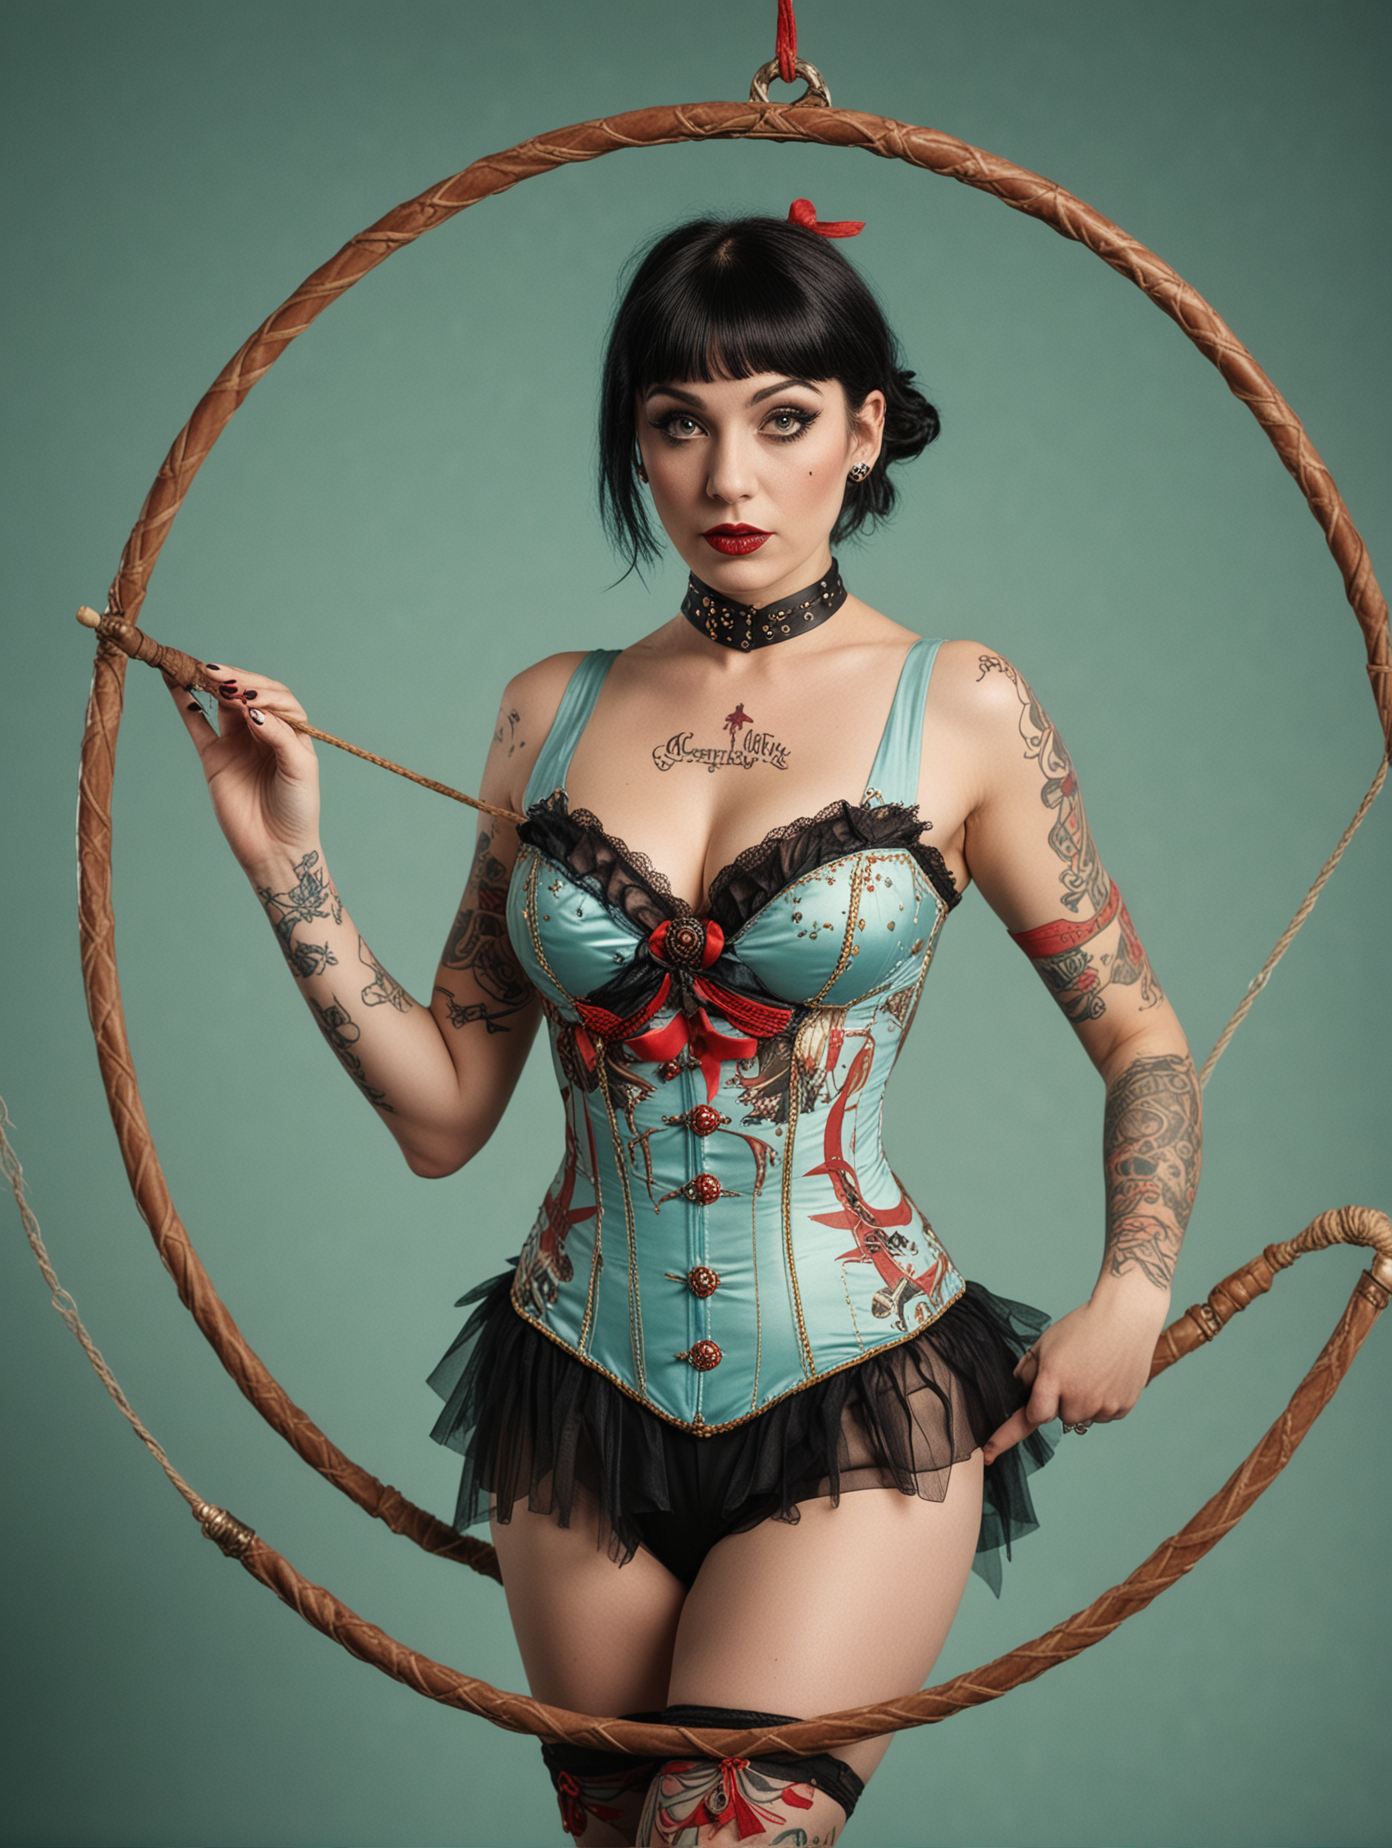 Whimsical yet Eerie Symbolism American 1920s Circus Portrait of Tattooed Female Acrobat in Pirate Attire with Aerial Hoop